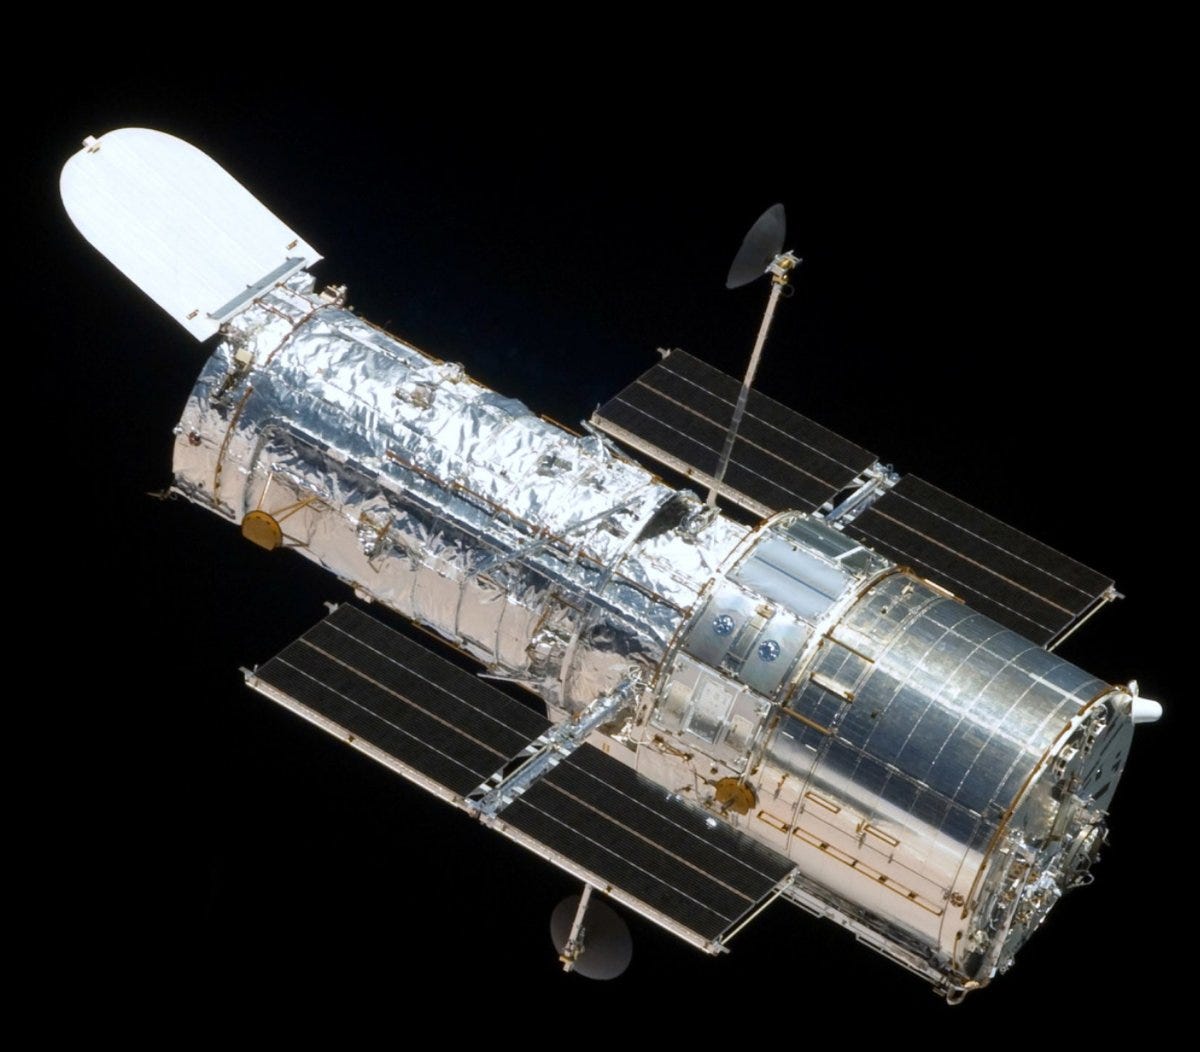 Hubble Space Telescope has just turned 34!